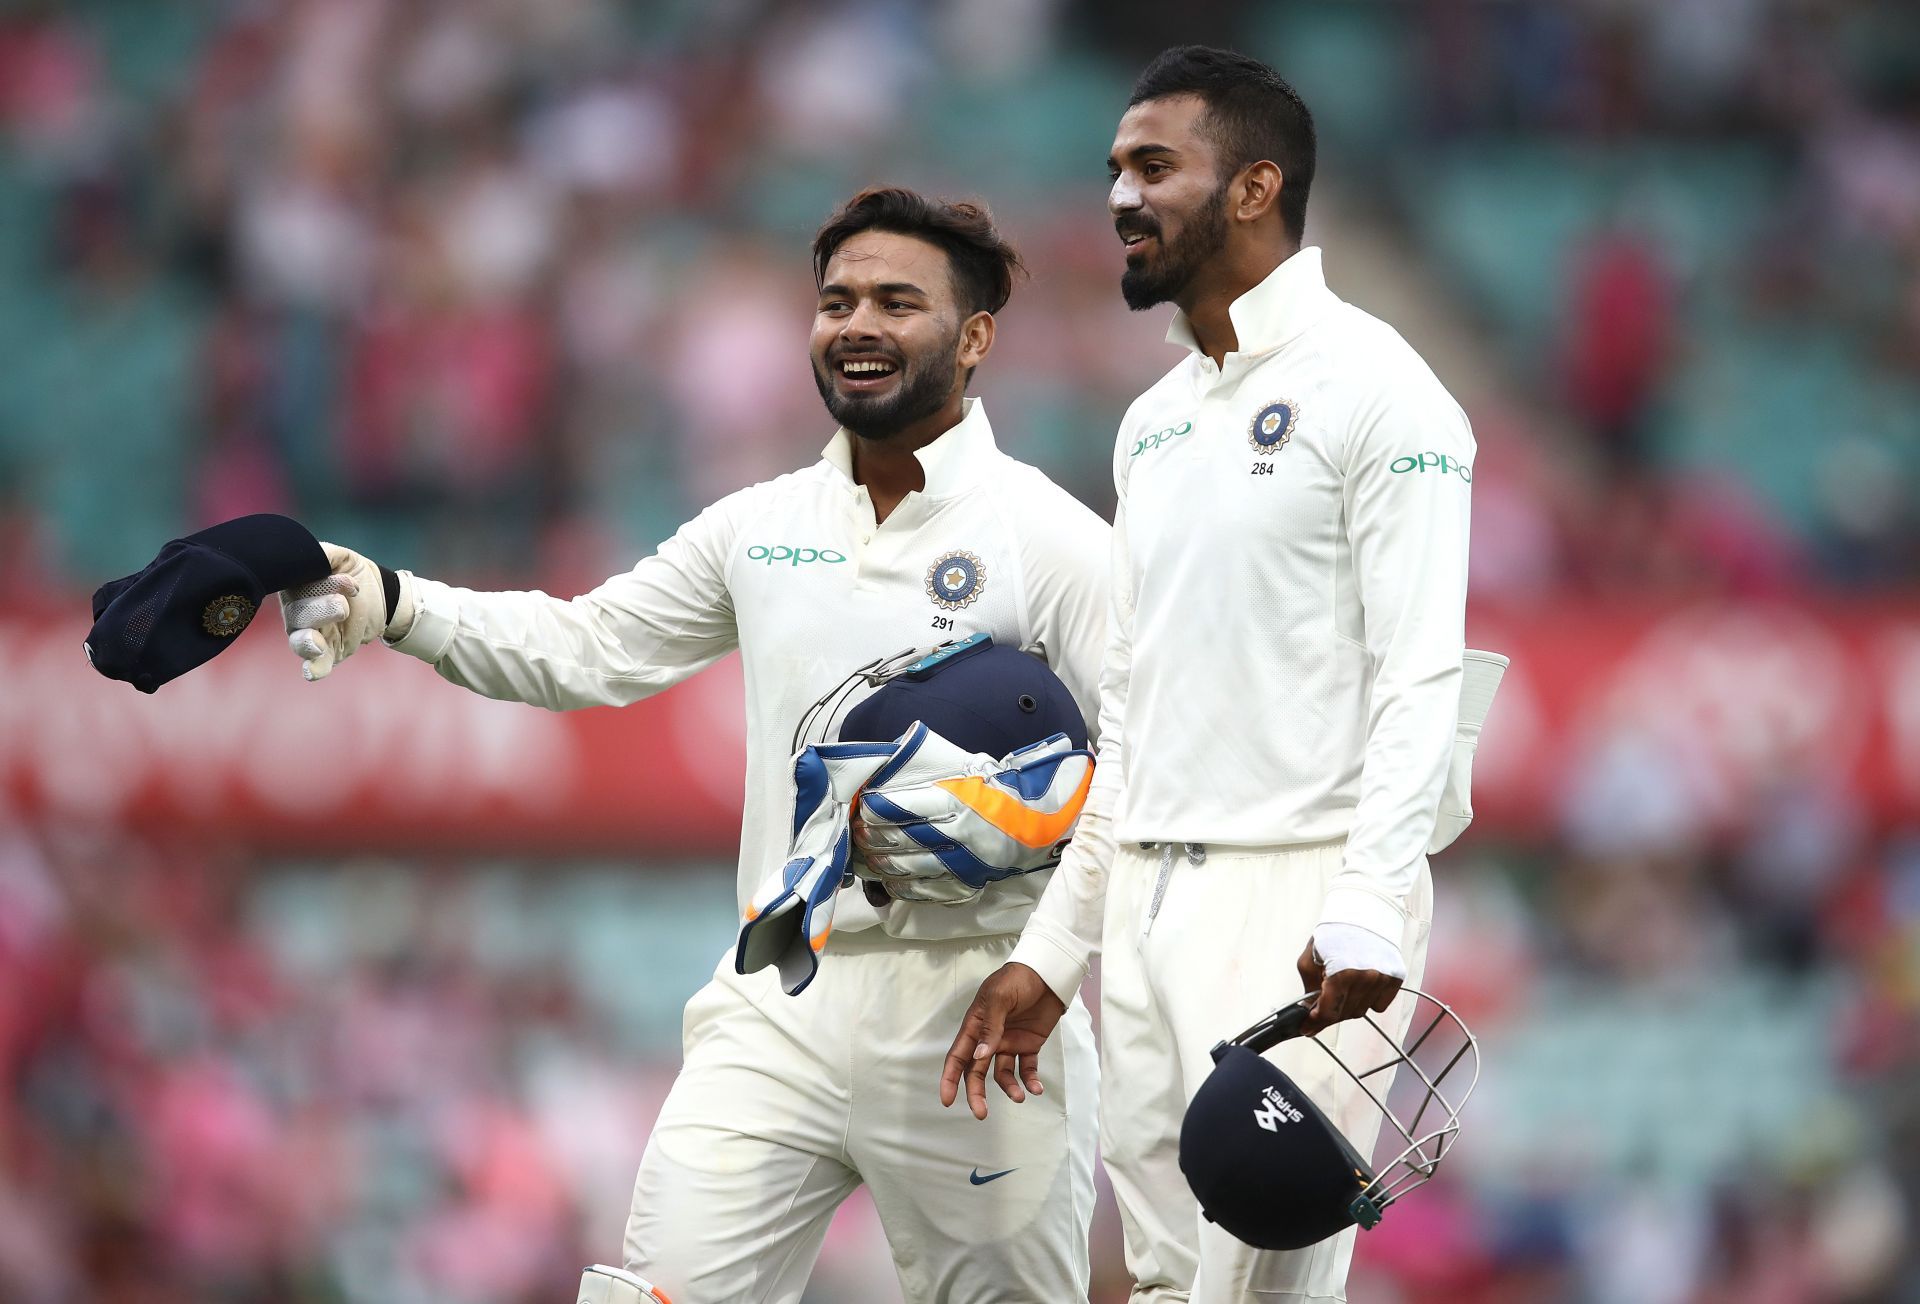 Rishabh Pant and KL Rahul are integral members of the Indian Test side